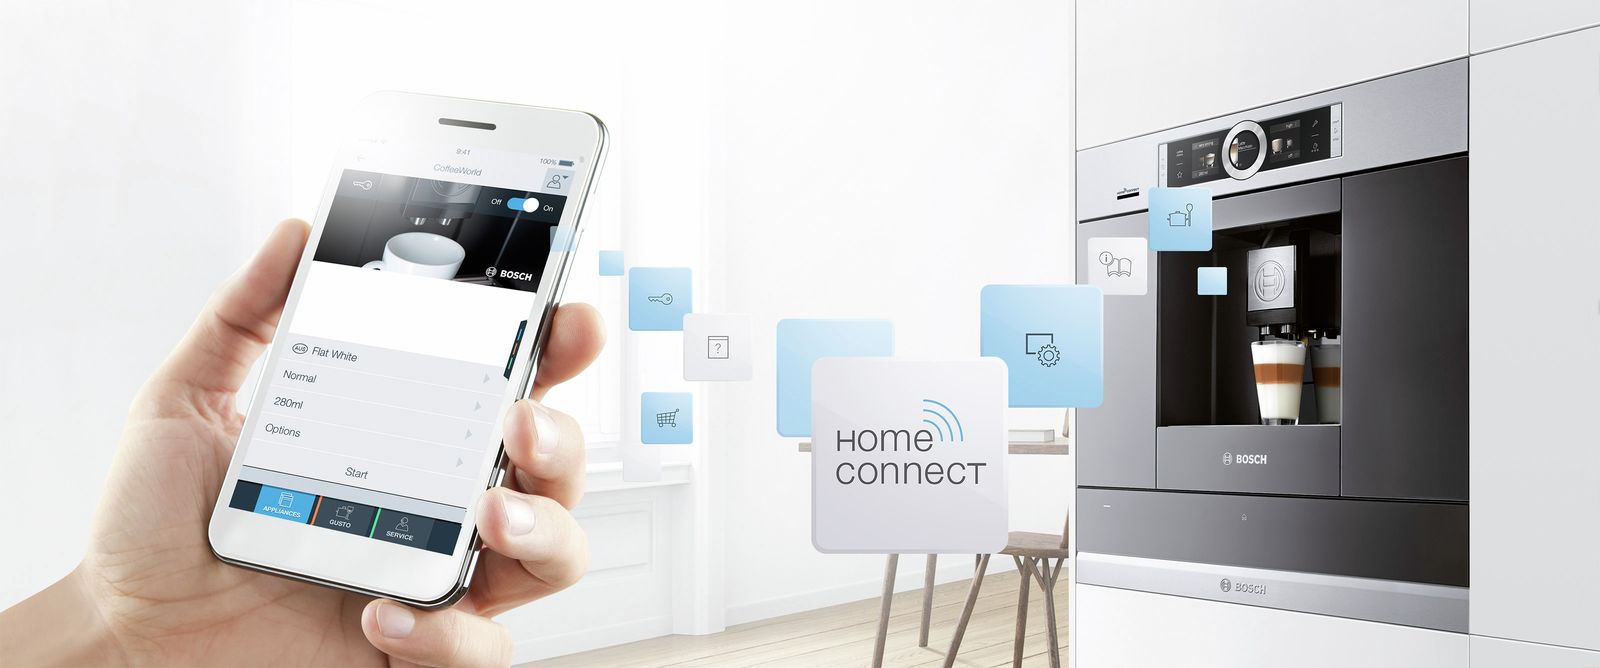 Home connect koffie